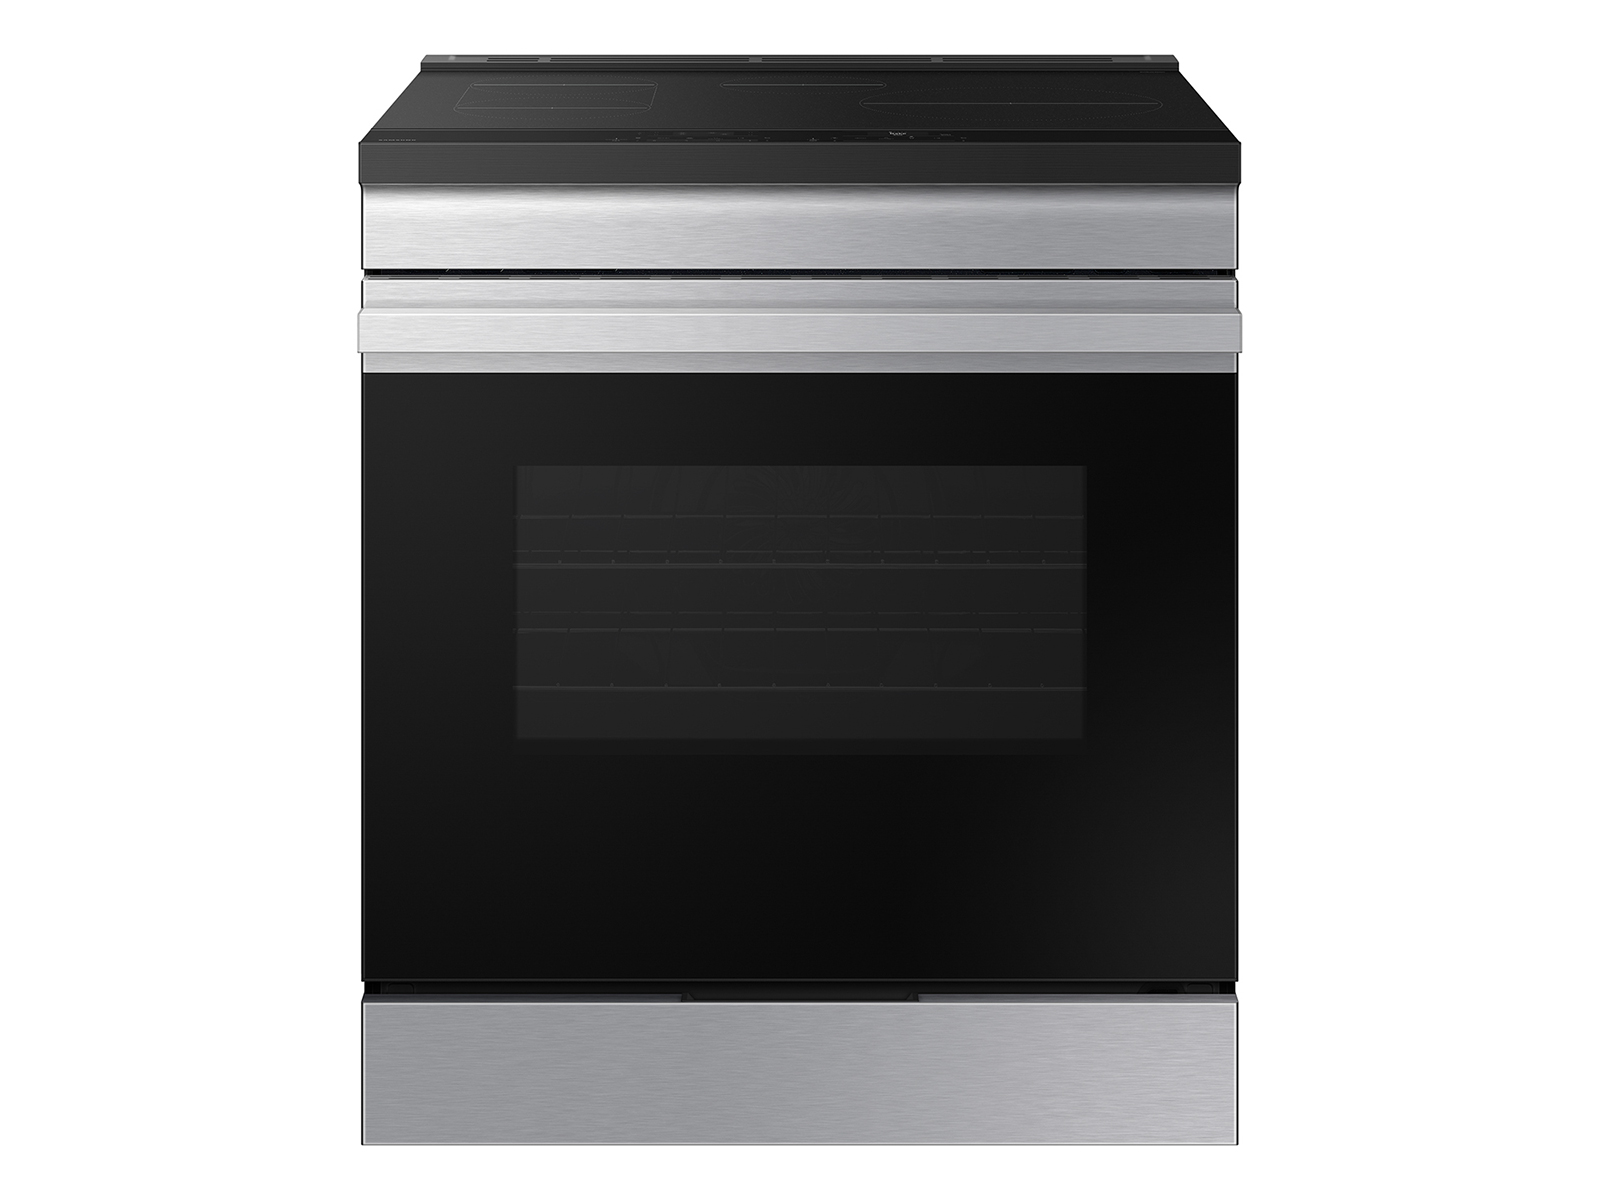 Bespoke Smart Slide-In Induction Range with Anti-Scratch Glass Cooktop & Air Fry